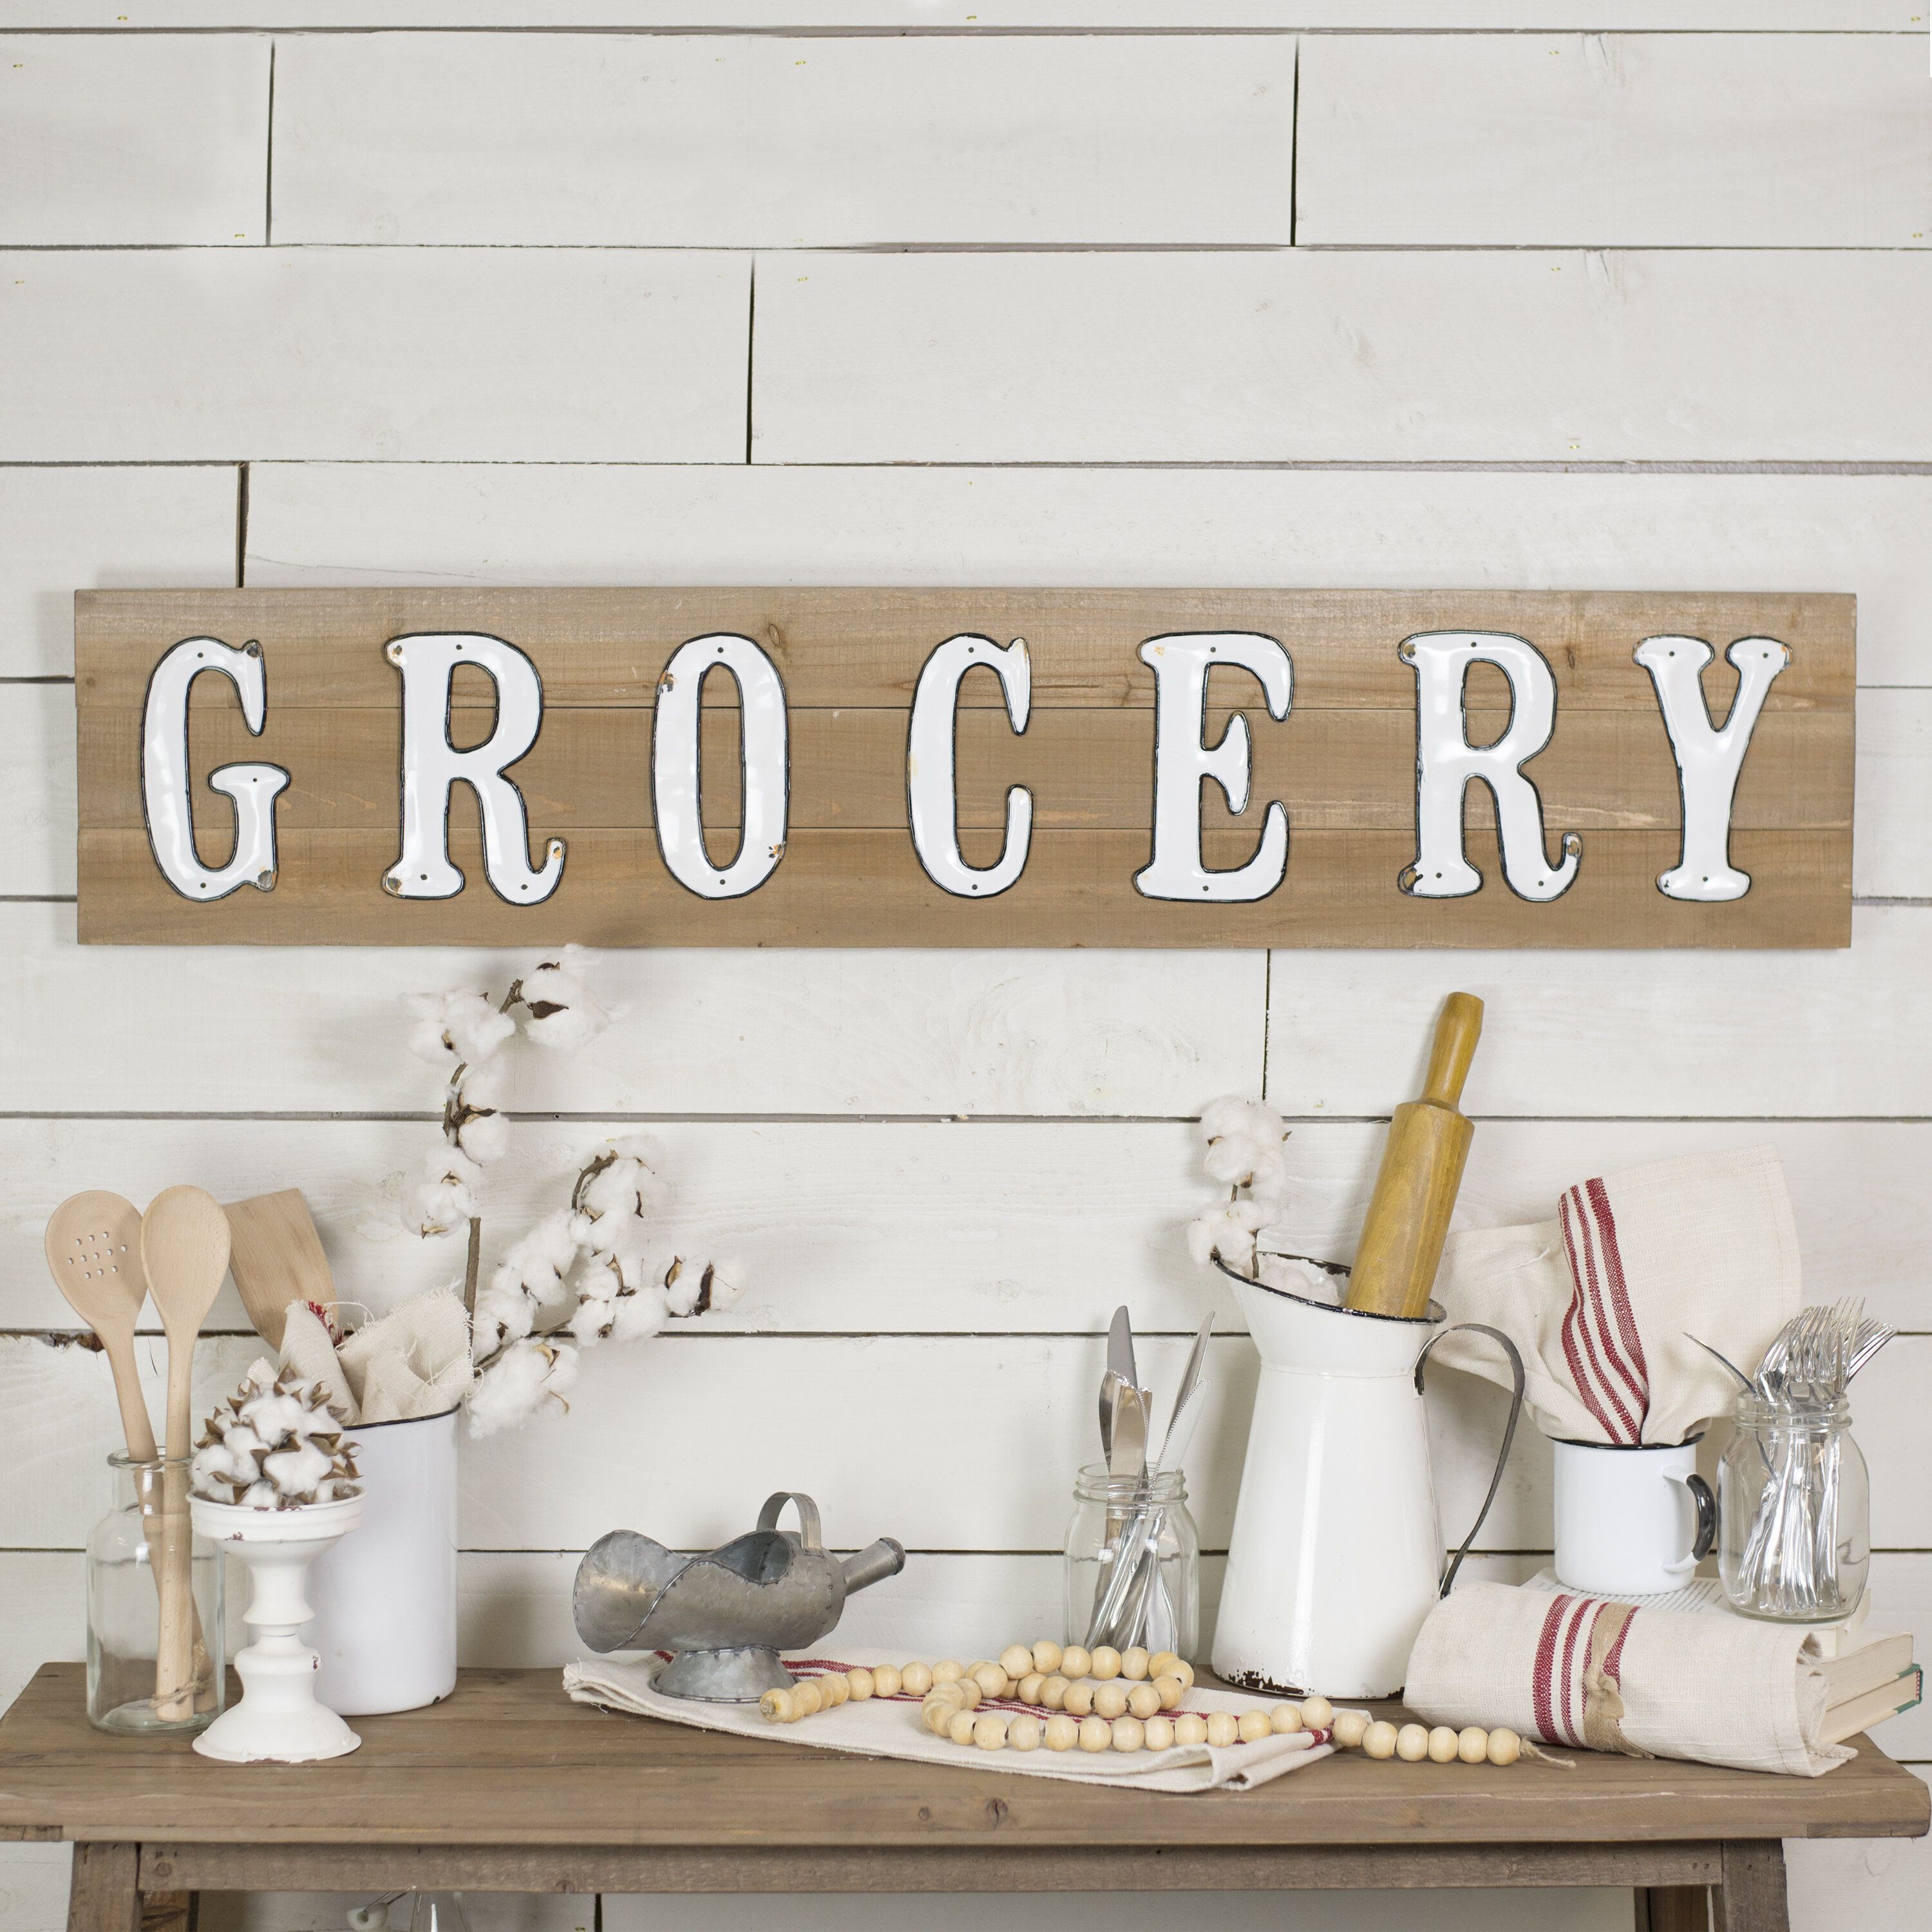 Large Vintage Kitchen Signs | Wayfair With Casual Country Eat Here Retro Wall Decor (View 14 of 30)